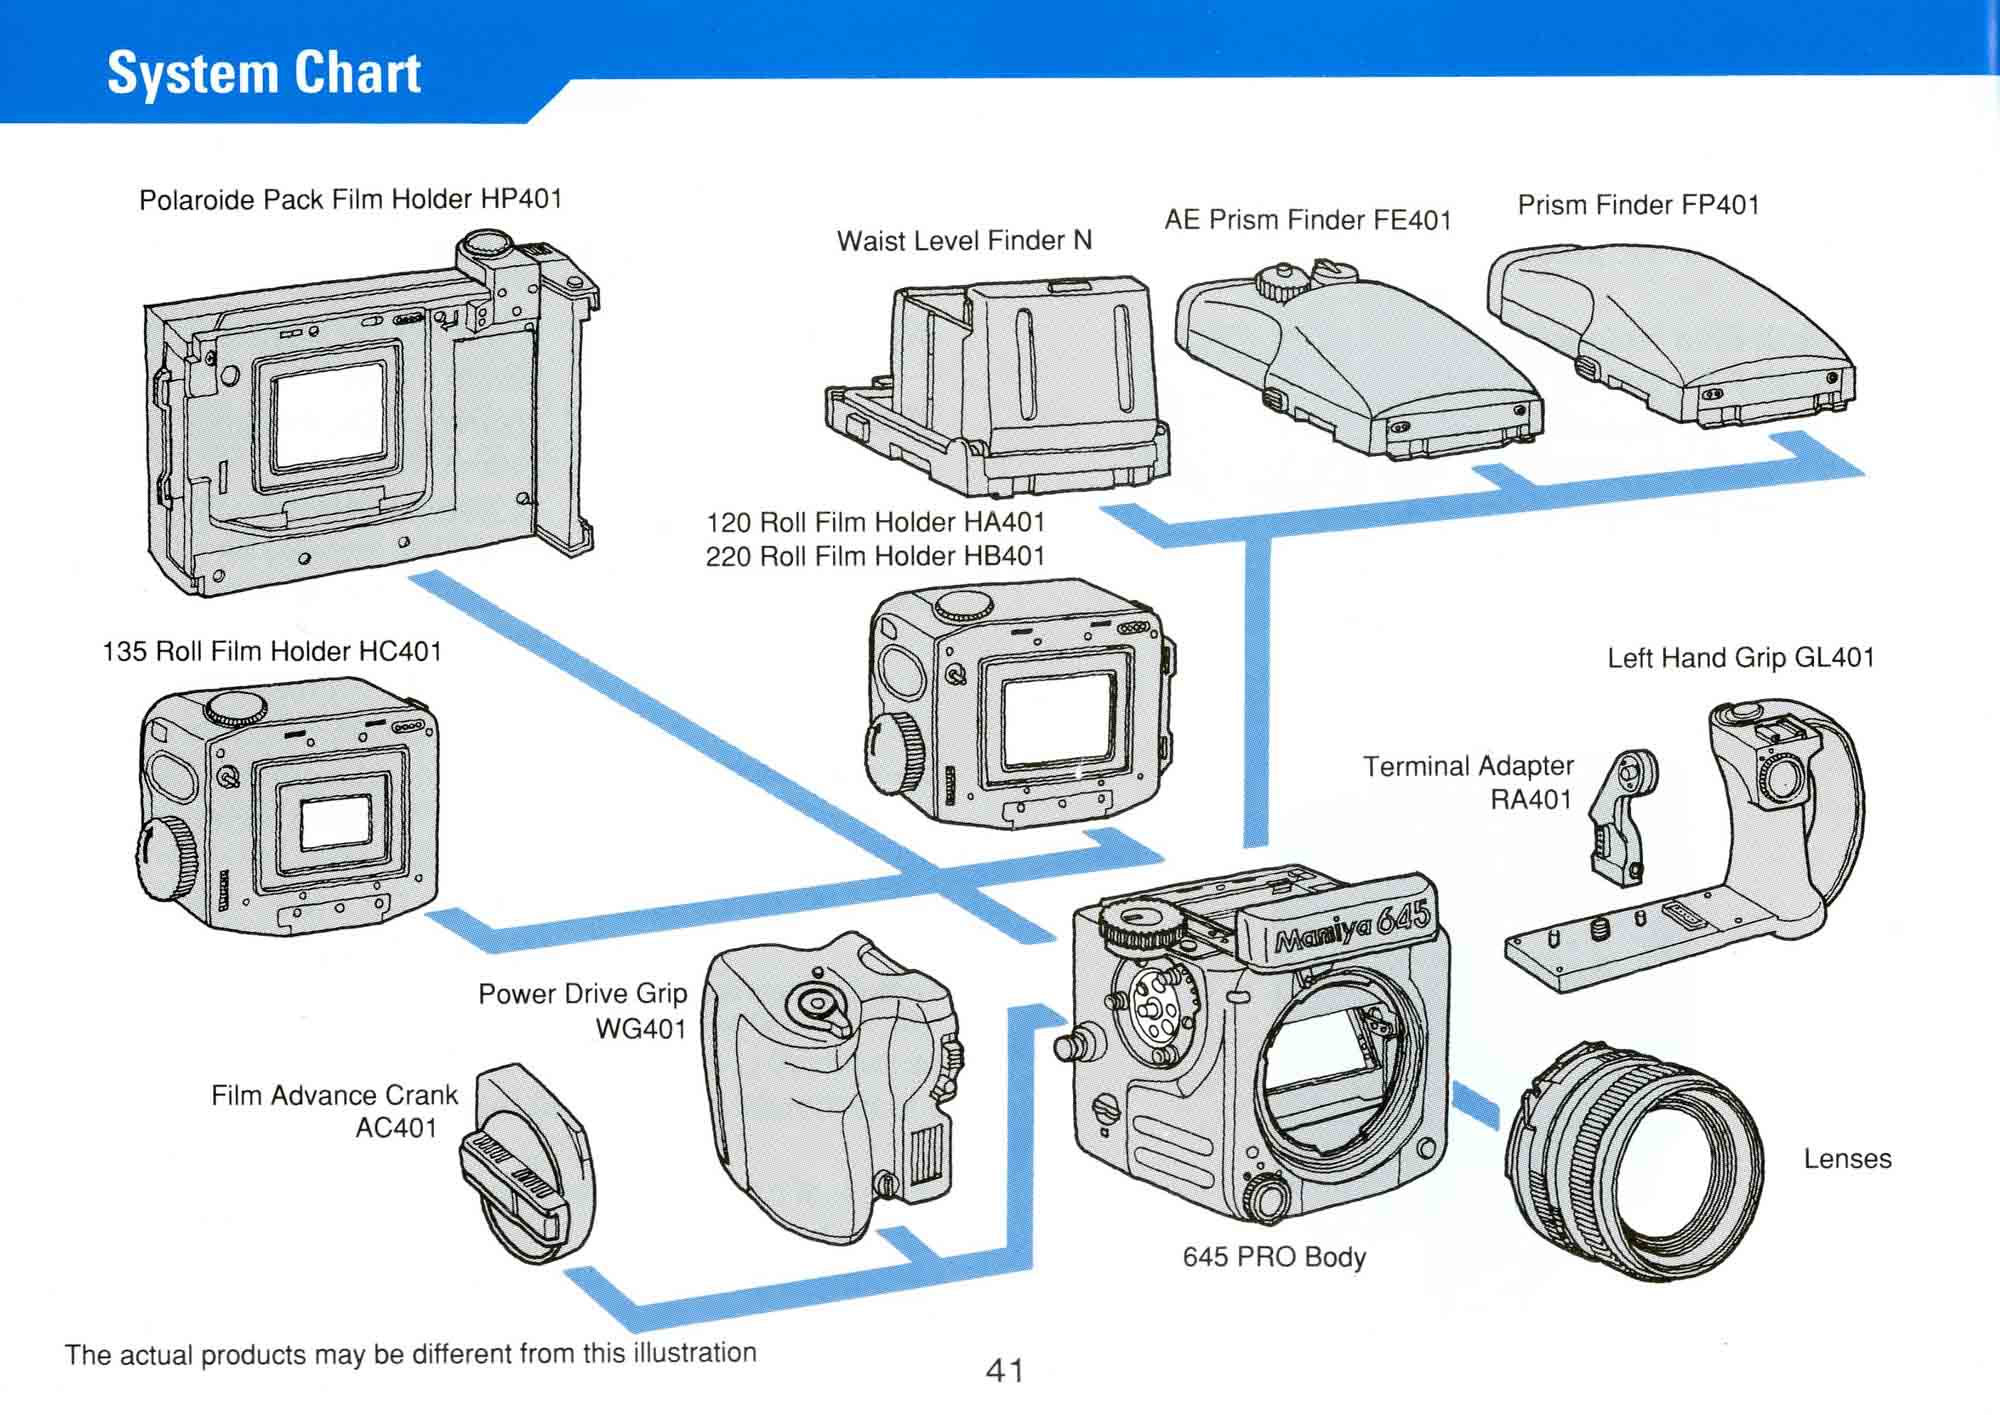 System chart from the Mamiya 645 Pro user manual